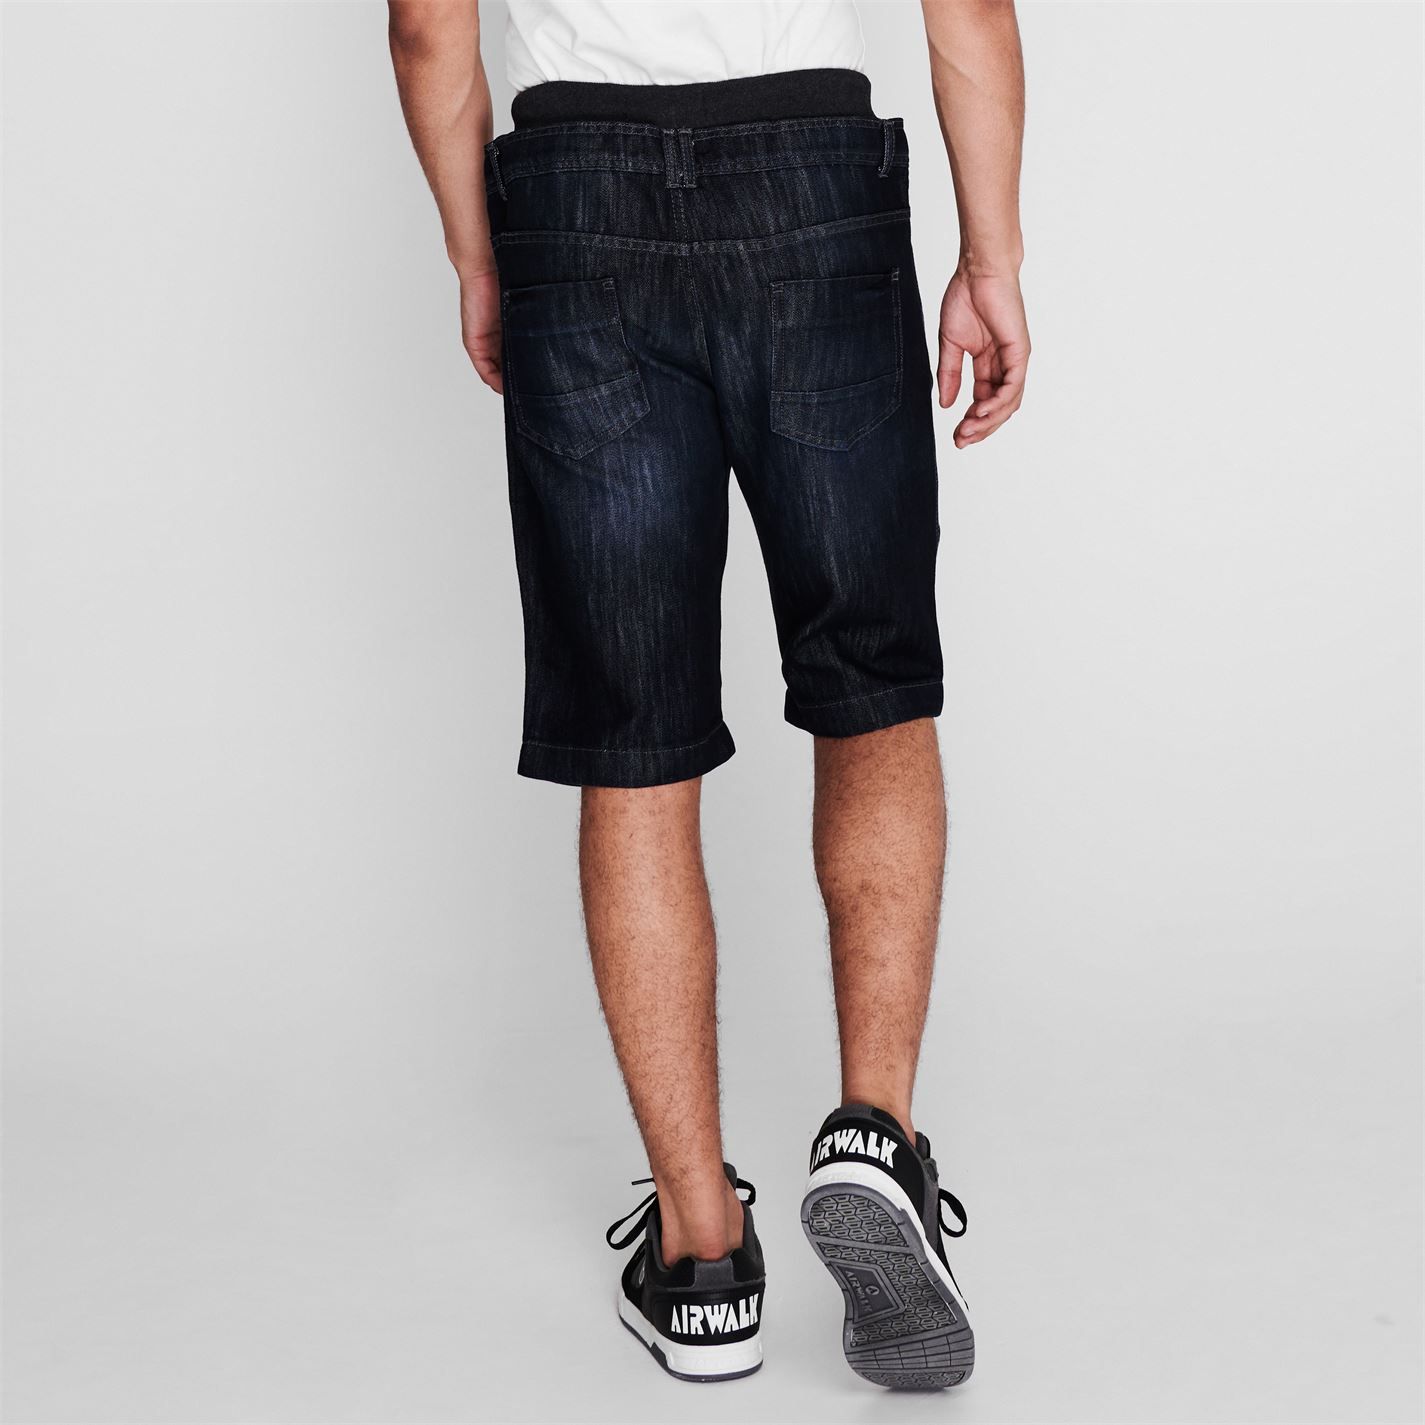 No Fear Double Waist Denim Shorts  Update your Spring/Summer wardrobe with the No Fear Double Waist Denim Shorts from No Fear. Crafted with an abundance of pockets and classic belt loops, these bottoms are perfect for casual days.